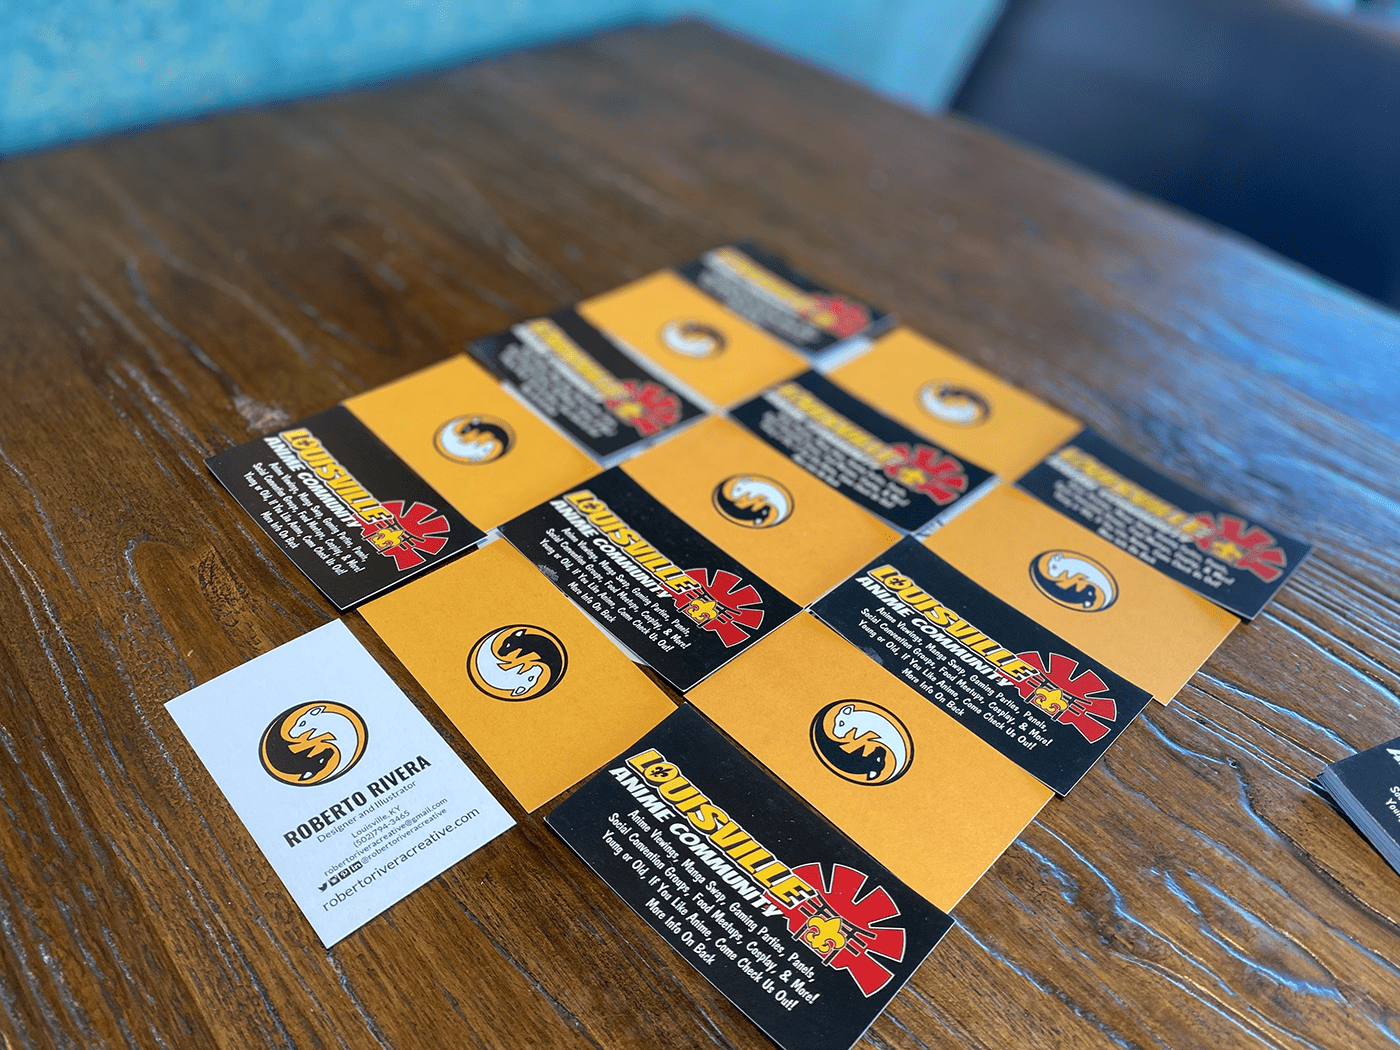 Lined up my personal business cards with my anime logo cards. Yellow is my favorite color.